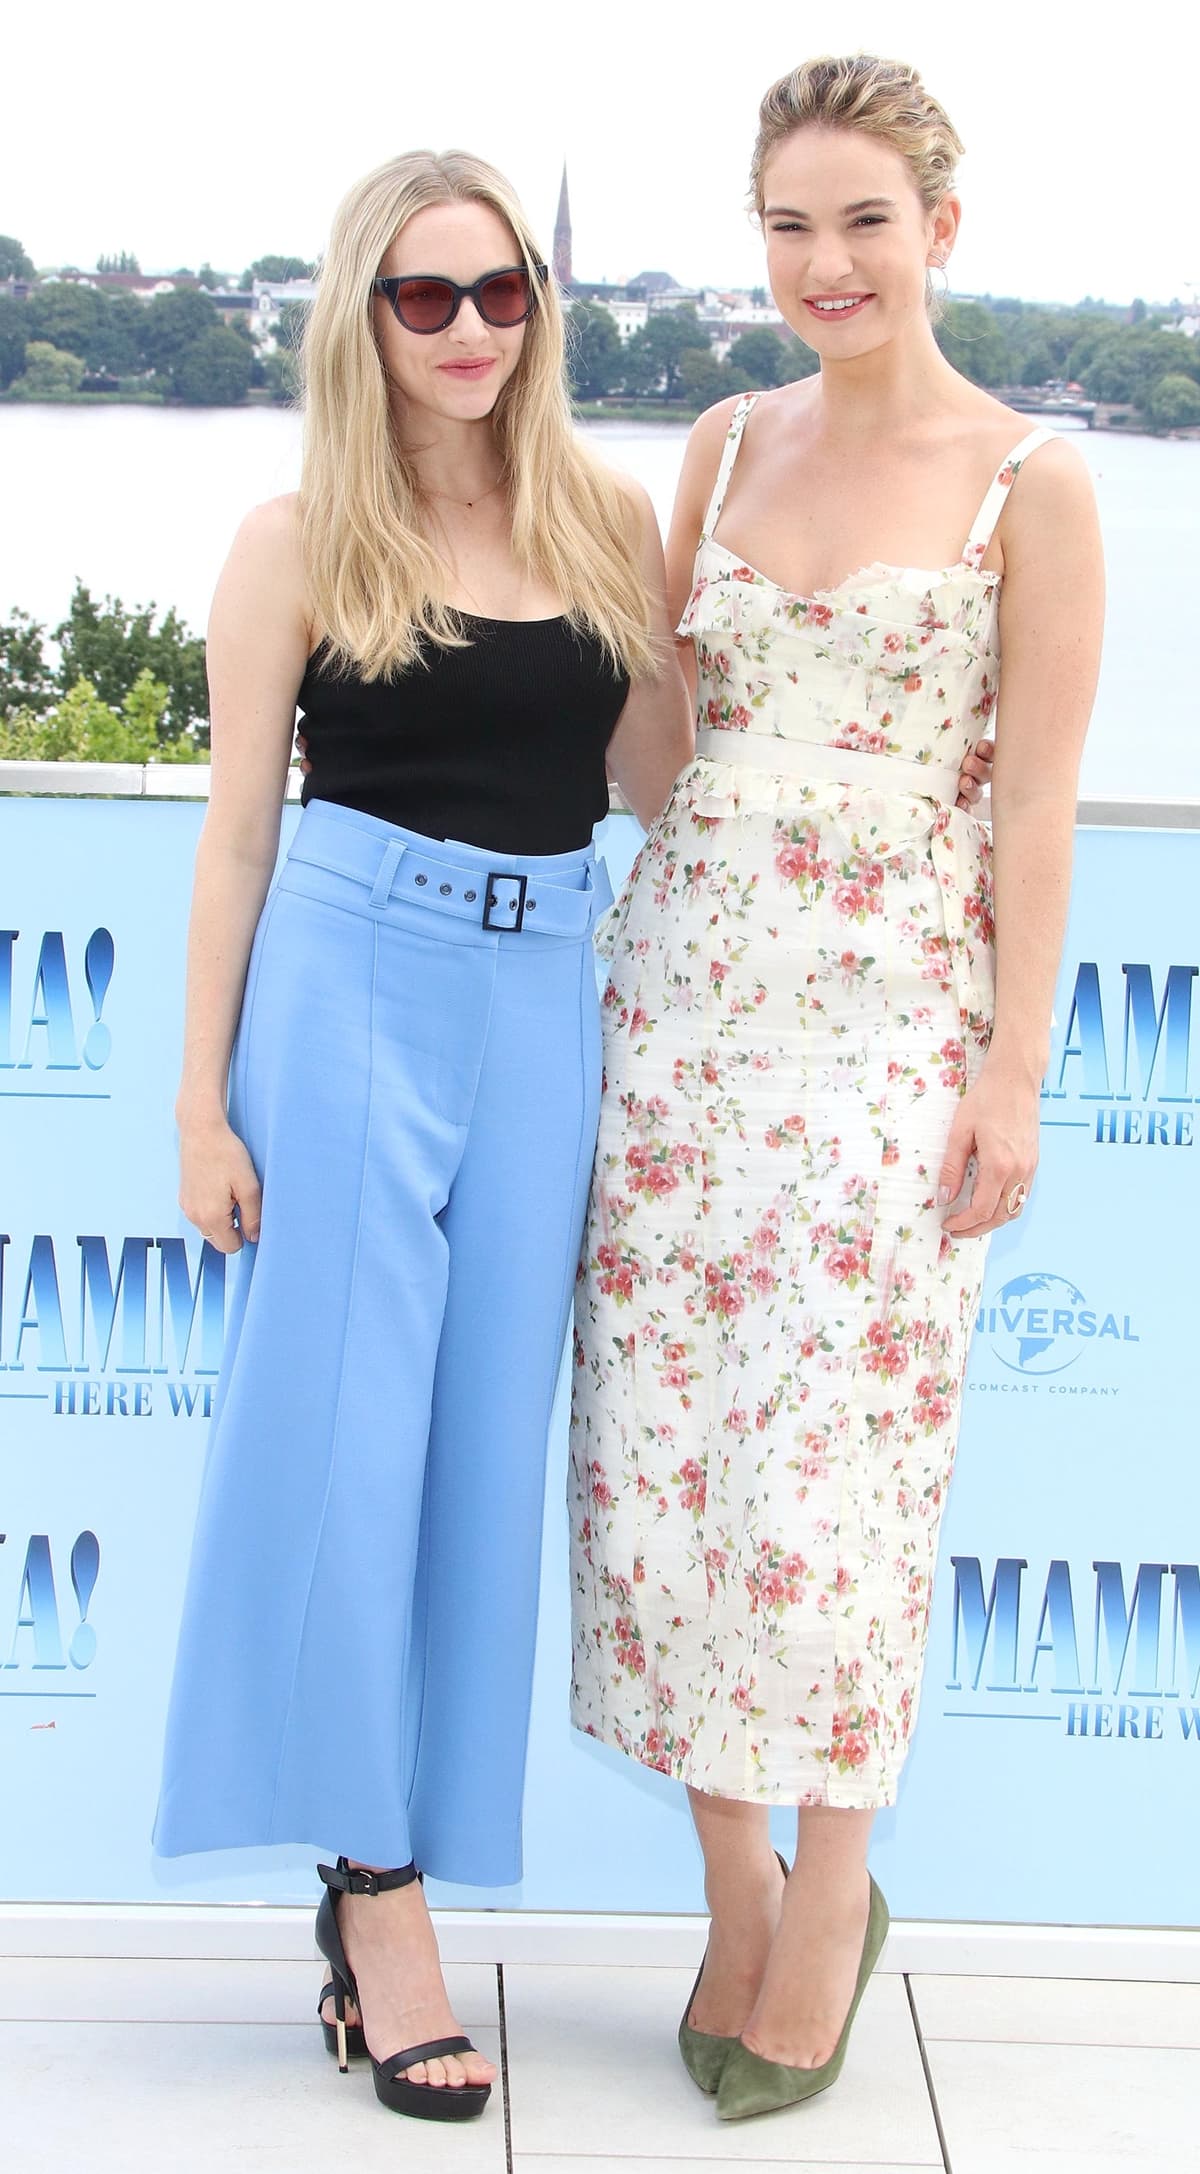 Actresses Amanda Seyfried (5' 2 ½", 158.8 cm) and Lily James (5' 7", 170.2 cm) stood side-by-side during the "Mamma Mia! Here We Go Again" musical photo call in Hamburg, Germany, on July 12, 2018, with a height difference of approximately 11.4 centimeters (4.5 inches)